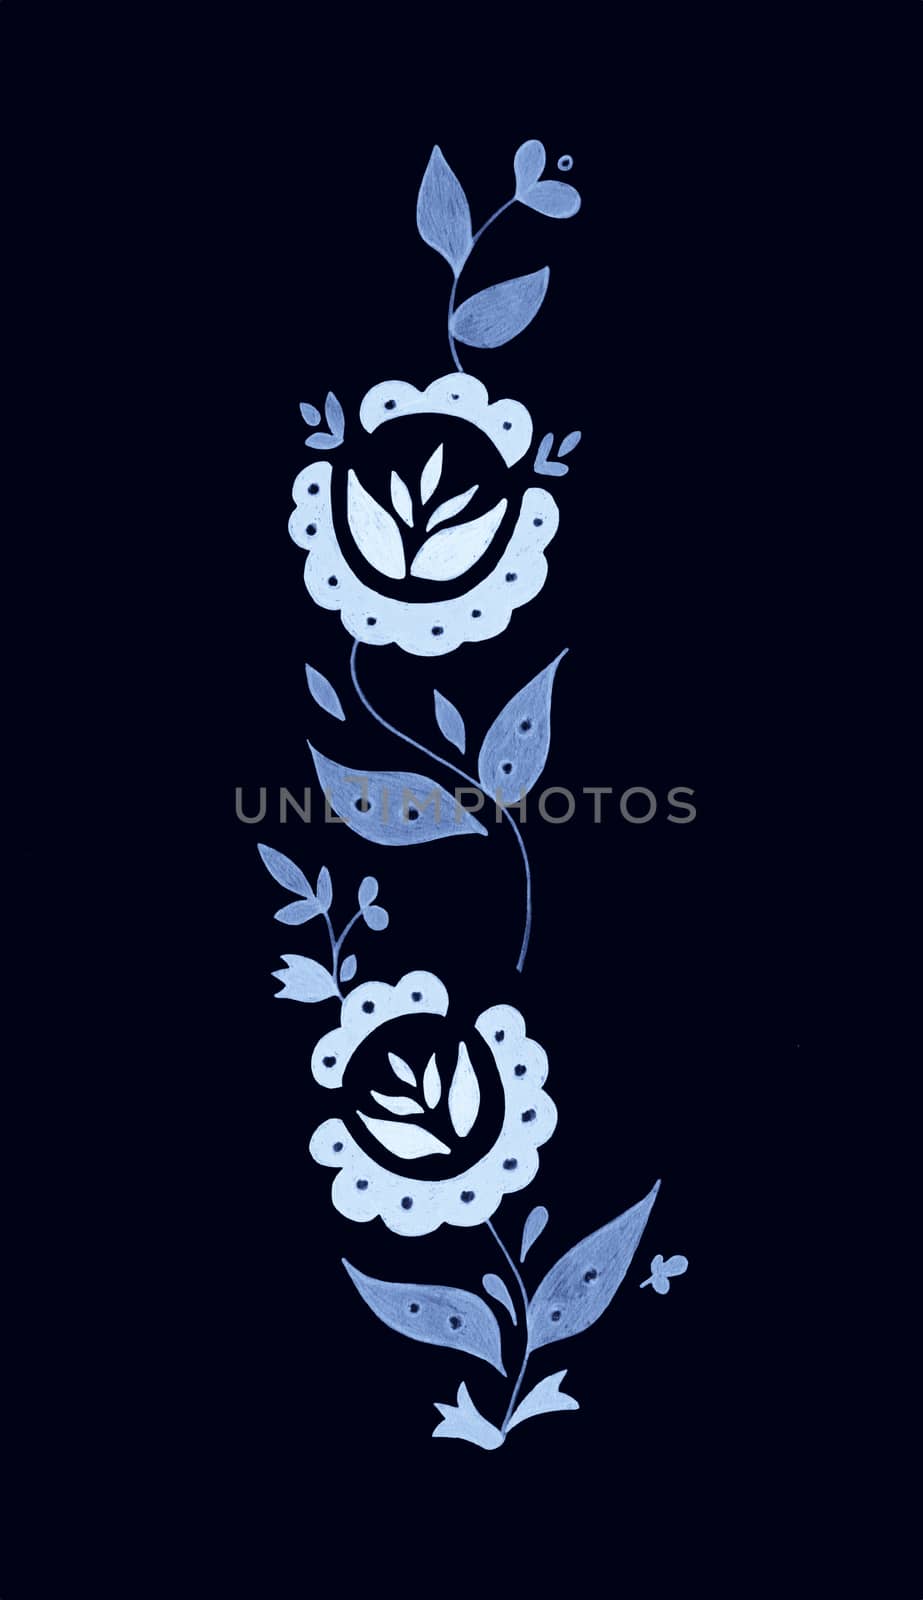 Decorative composition of abstract doodle flowers and leaves. Floral motif illustration. Design element. Hand drawn vertical ornament isolated on white background by sshisshka